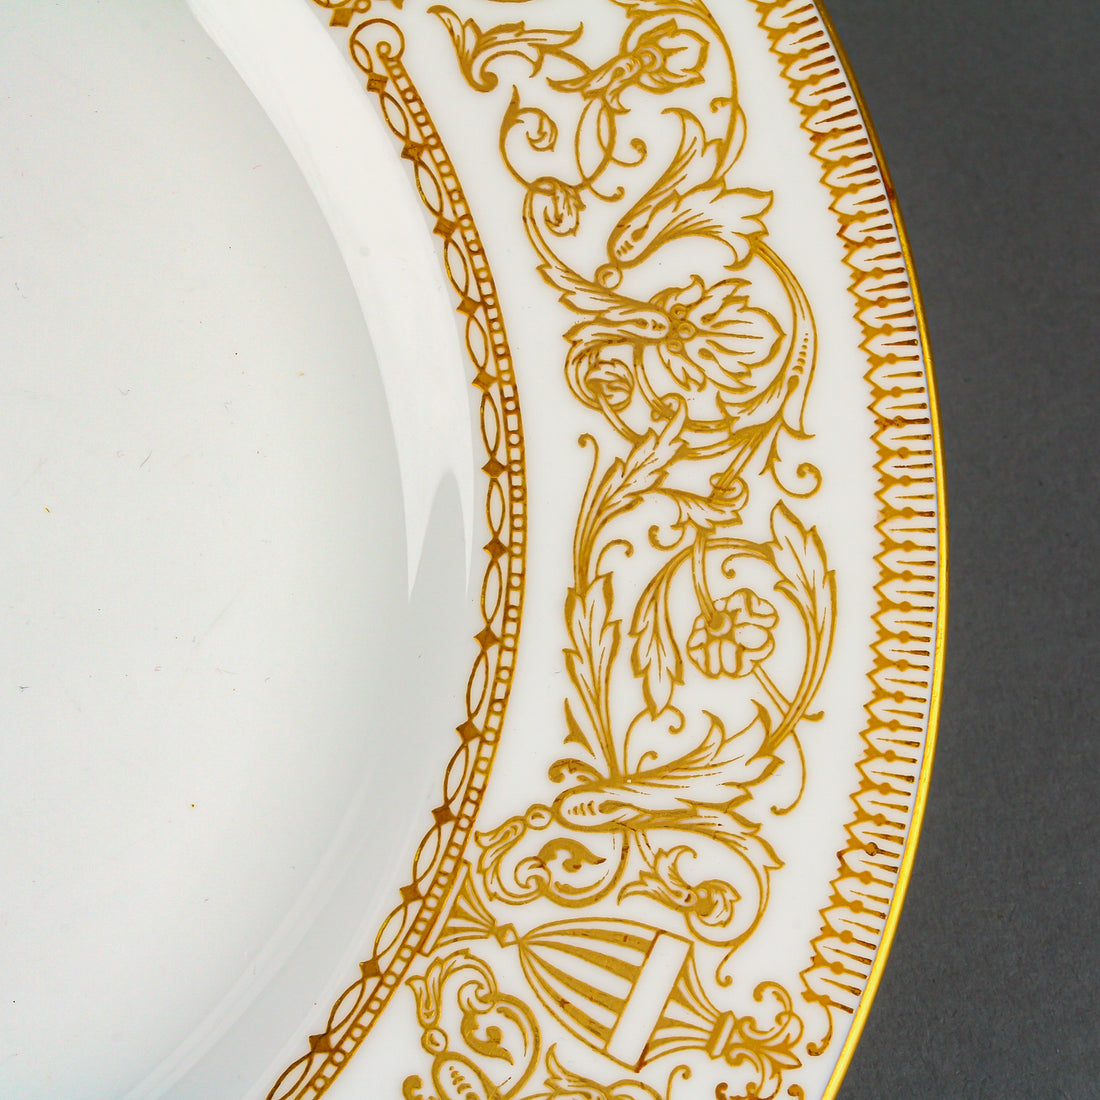 ROYAL WORCESTER White & Gold Hyde Park - 10 Place Settings +